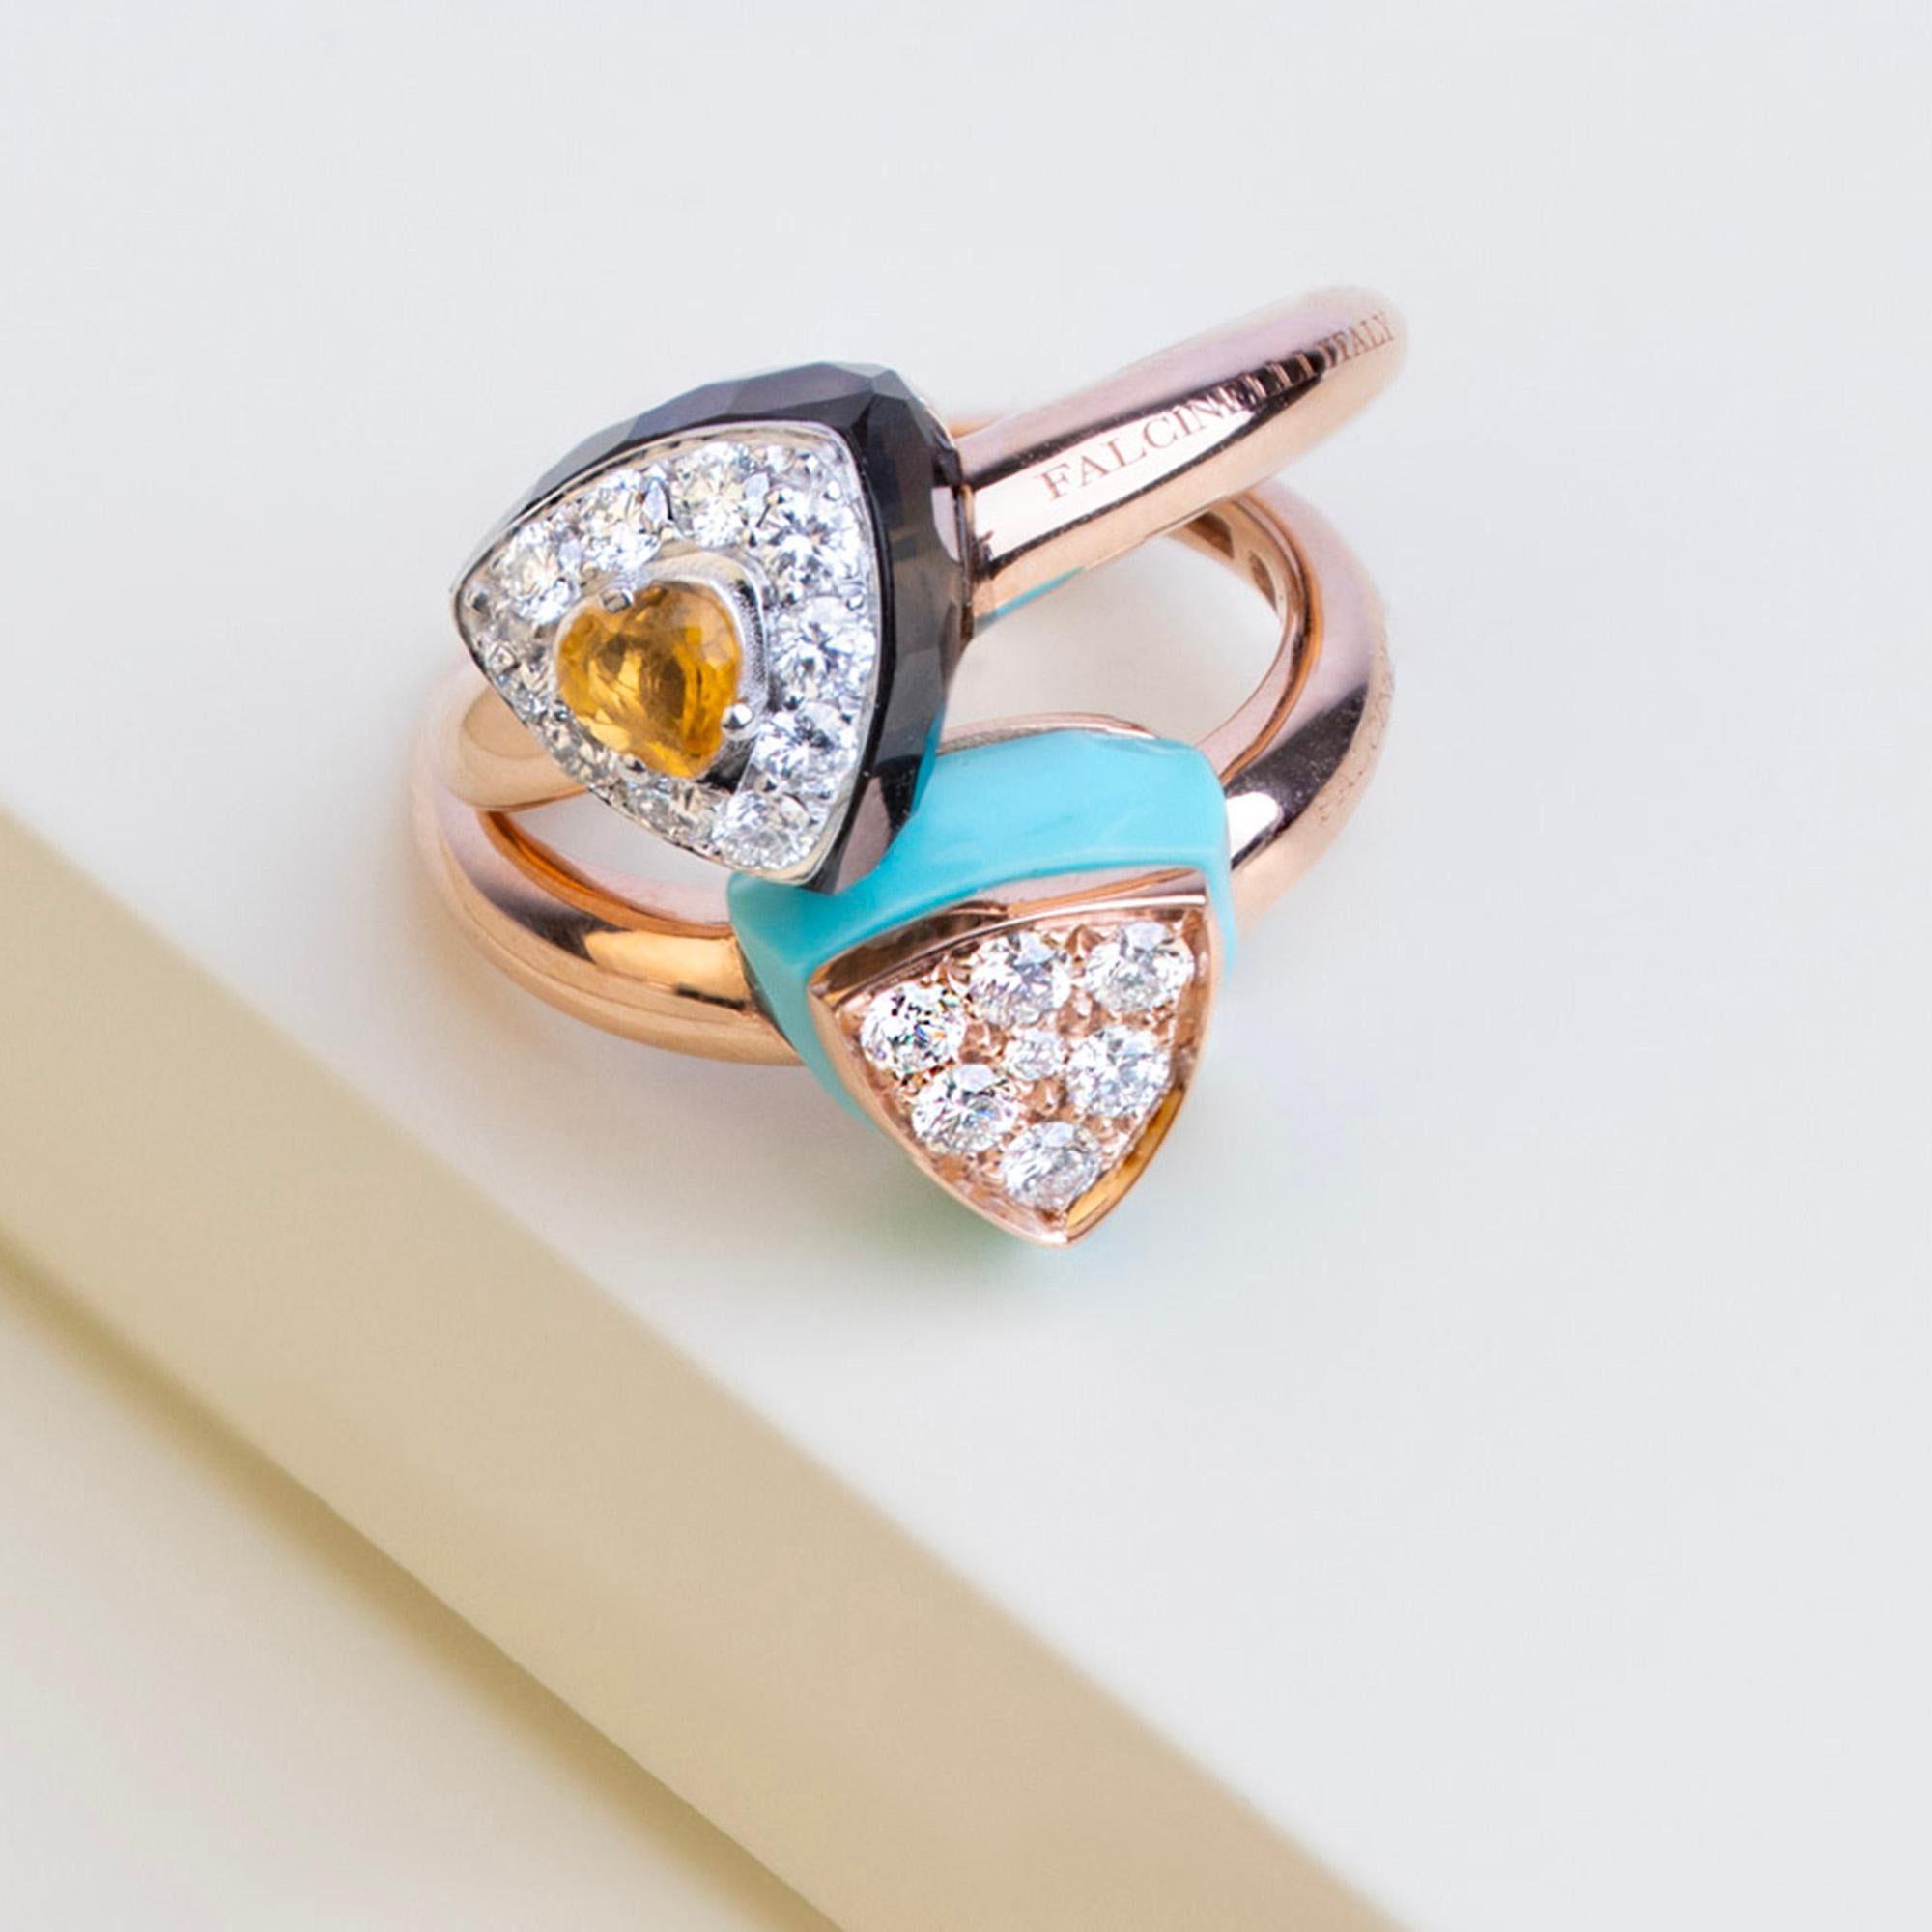 For Sale:  Les Petits Bonbons Ring Triangle with Citrine, Smoky Quartz and Diamonds 3